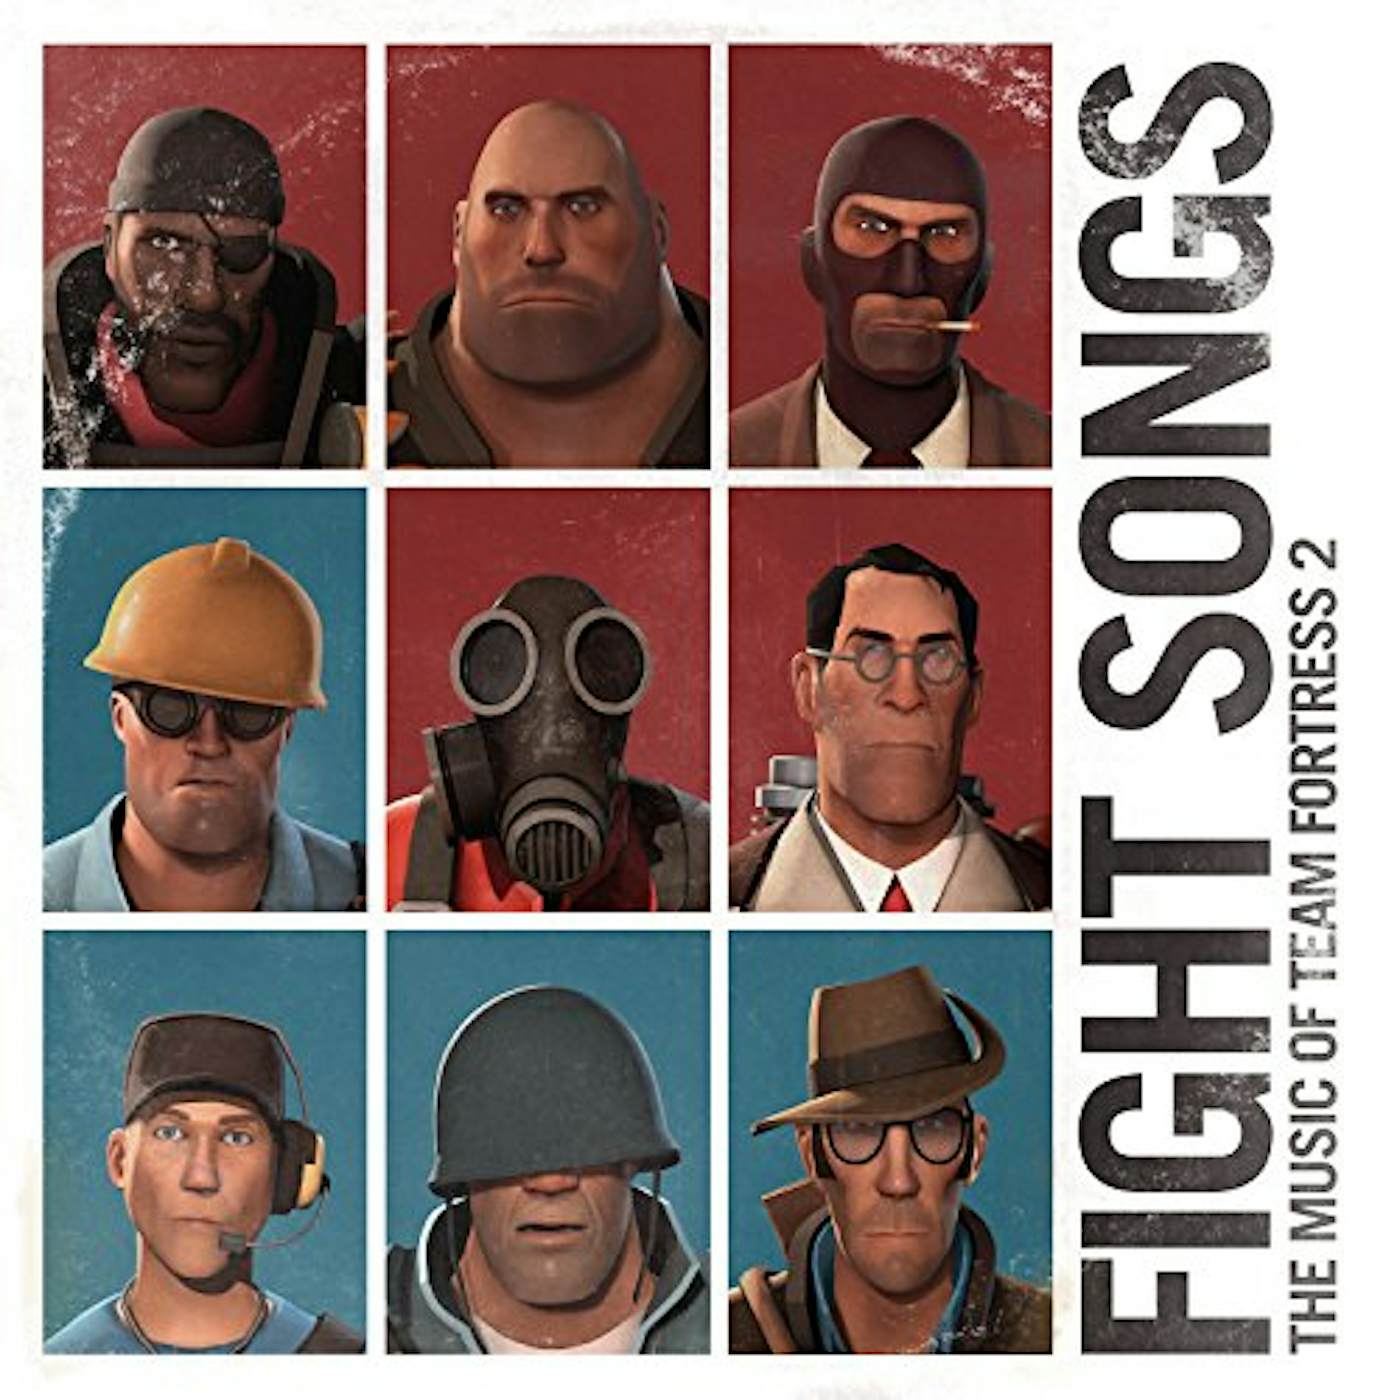 Valve Studio Orchestra Fight Songs: The Music of Team Fortress 2 Vinyl Record